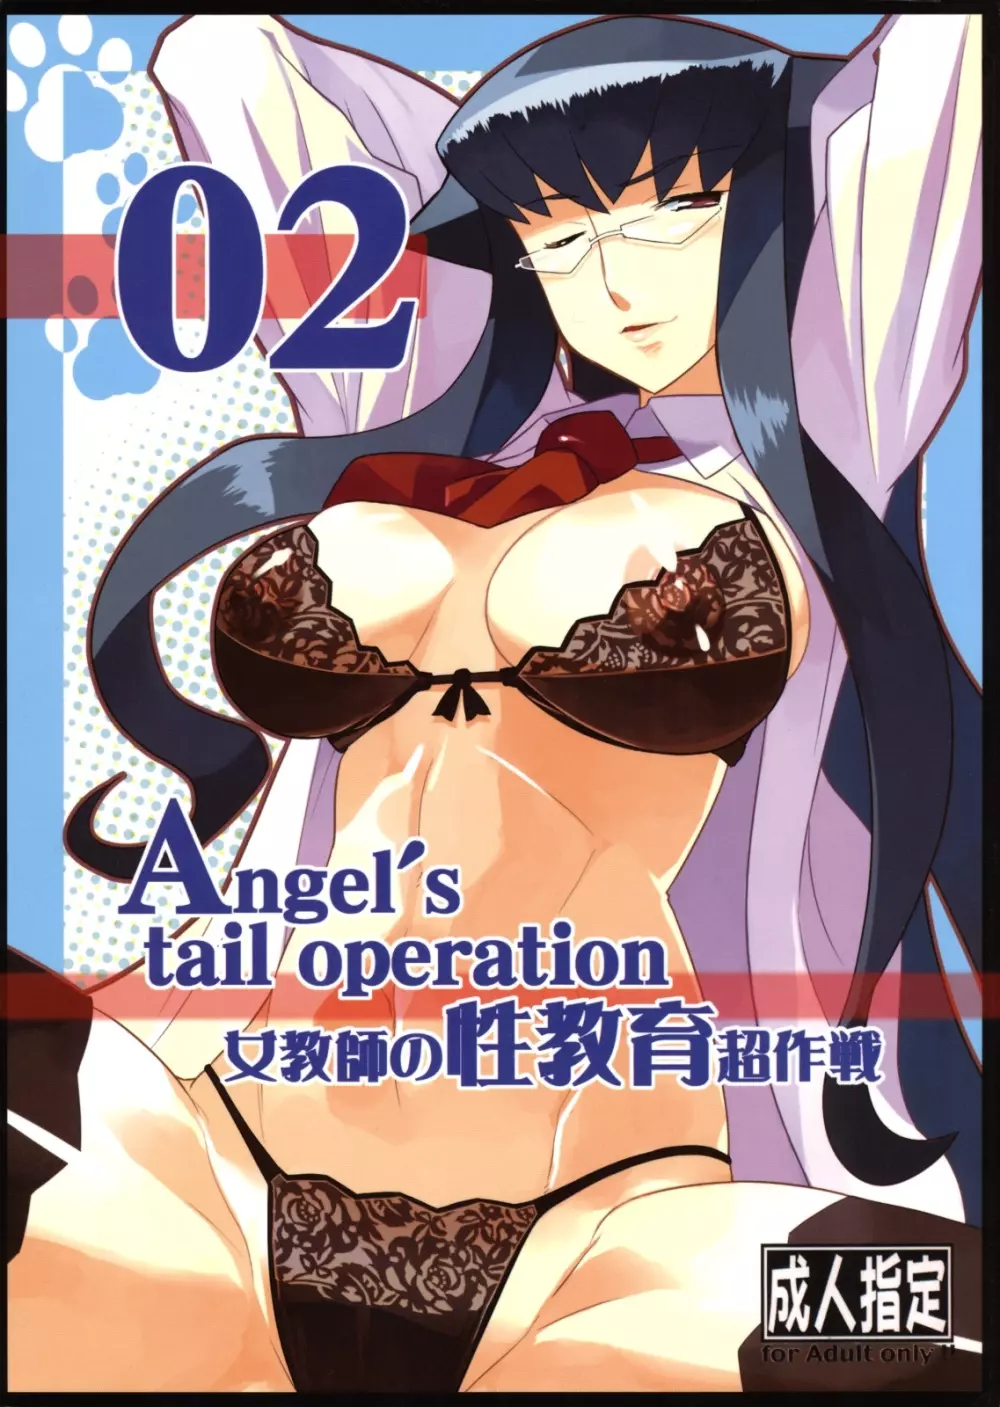 Angel’s tail operation 02 女教師の性教育超作戦